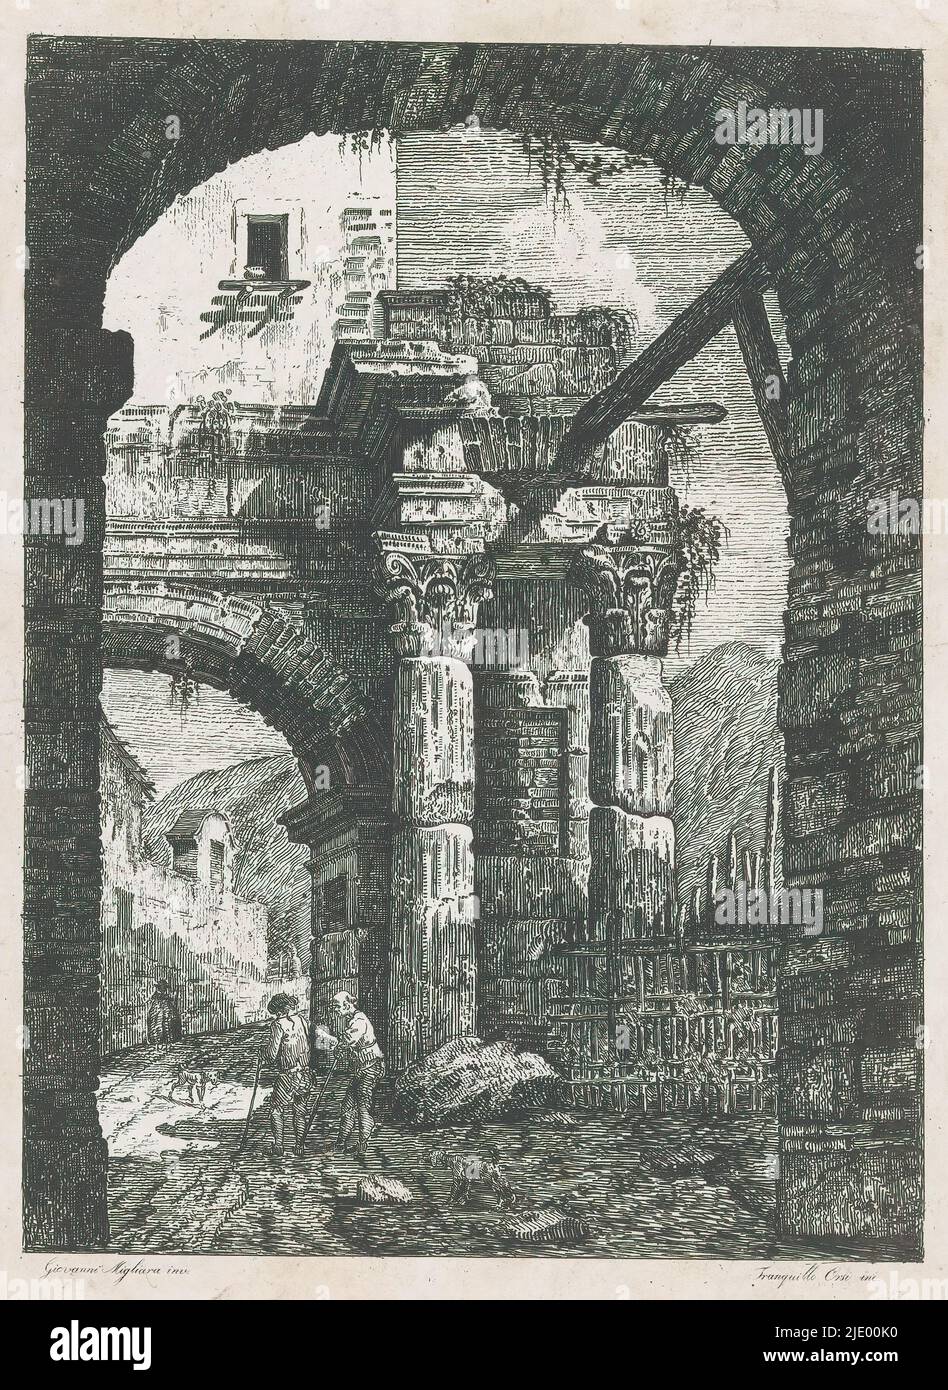 Antique ruins and walkers on a path, Ruin of an ancient gate with Corinthian columns. On the path passing under the gate two walkers with two dogs. In the background a mountainous landscape. The scene is framed by a second gate in the foreground., print maker: Tranquillo Orsi, (mentioned on object), after design by: Giovanni Migliara, (mentioned on object), Italy, 1795 - c. 1845, paper, etching, height 276 mm × width 211 mm Stock Photo